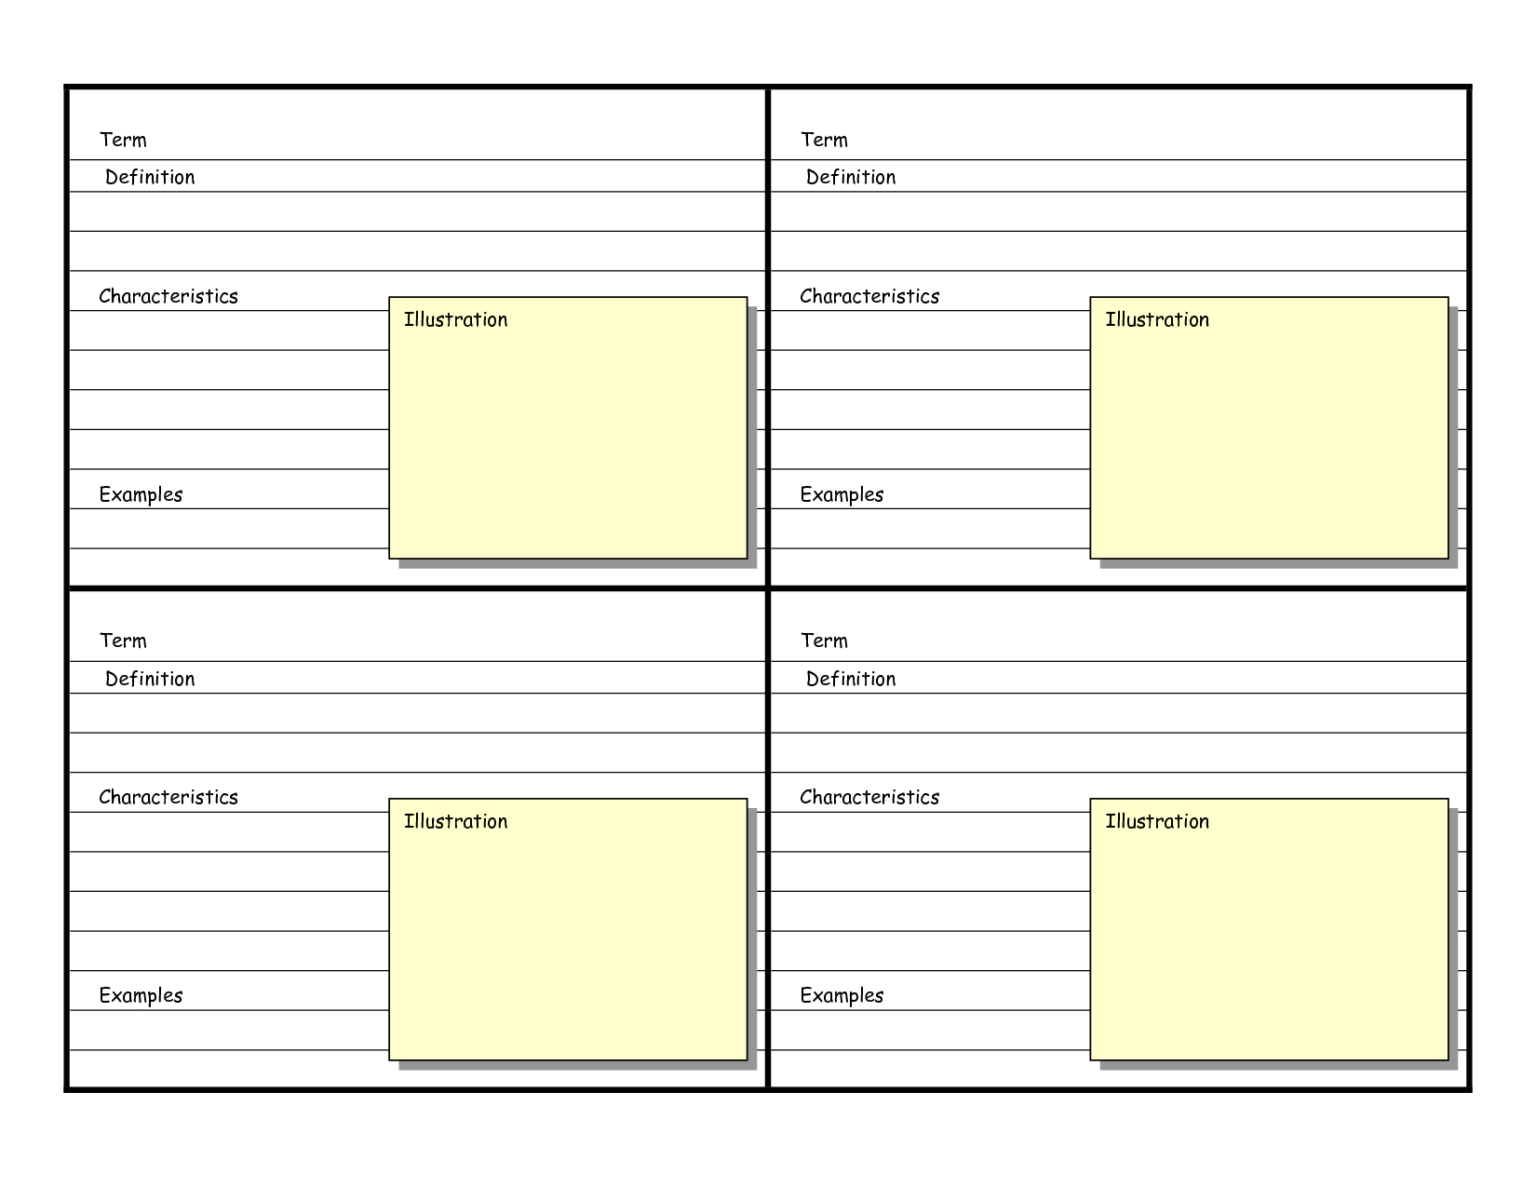 blank-vocabulary-card-template-vocabulary-flash-cards-within-cue-card